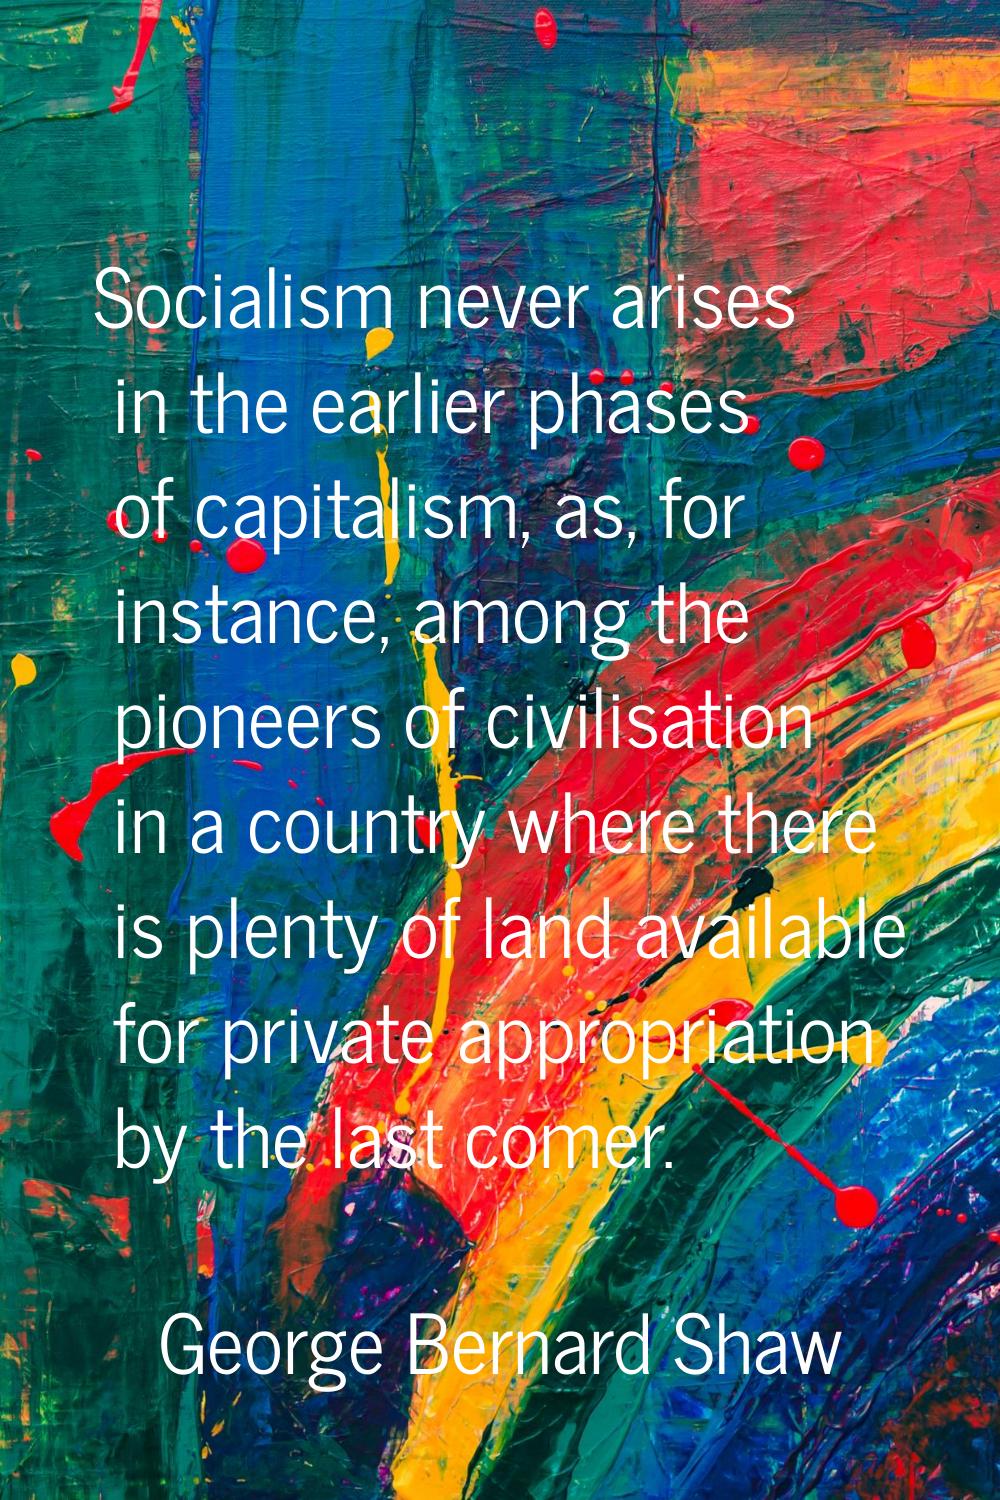 Socialism never arises in the earlier phases of capitalism, as, for instance, among the pioneers of